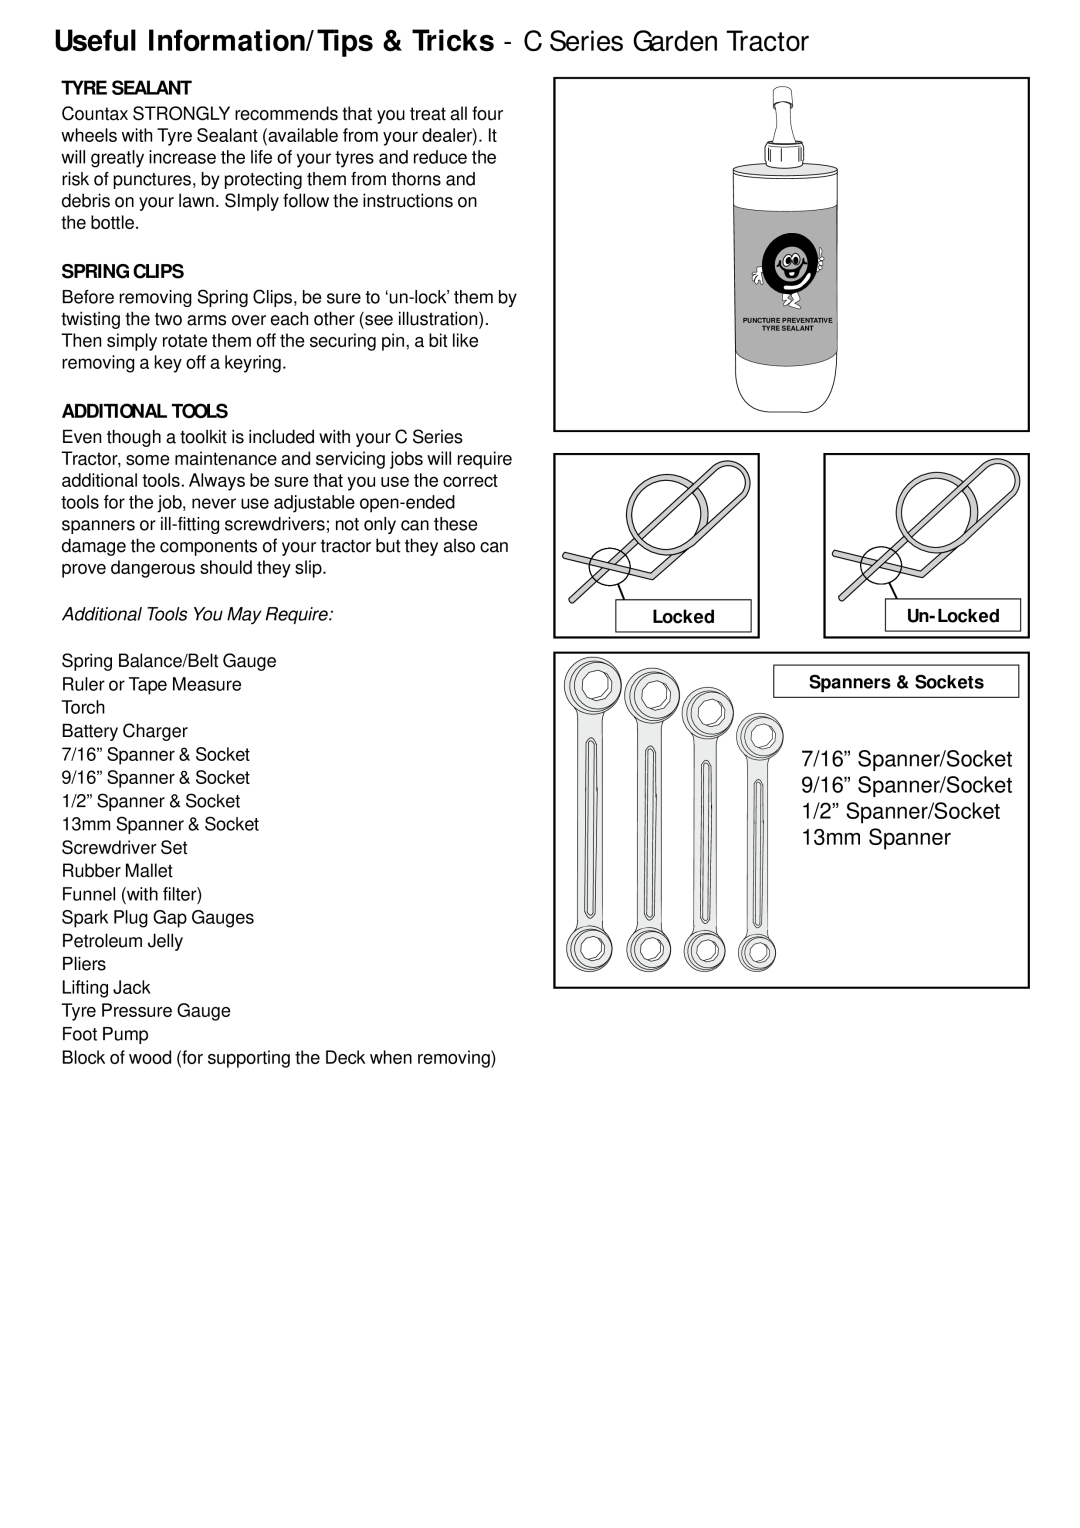 Countax manual Useful Information/Tips & Tricks - C Series Garden Tractor, Tyre Sealant, Spring Clips, Additional Tools 